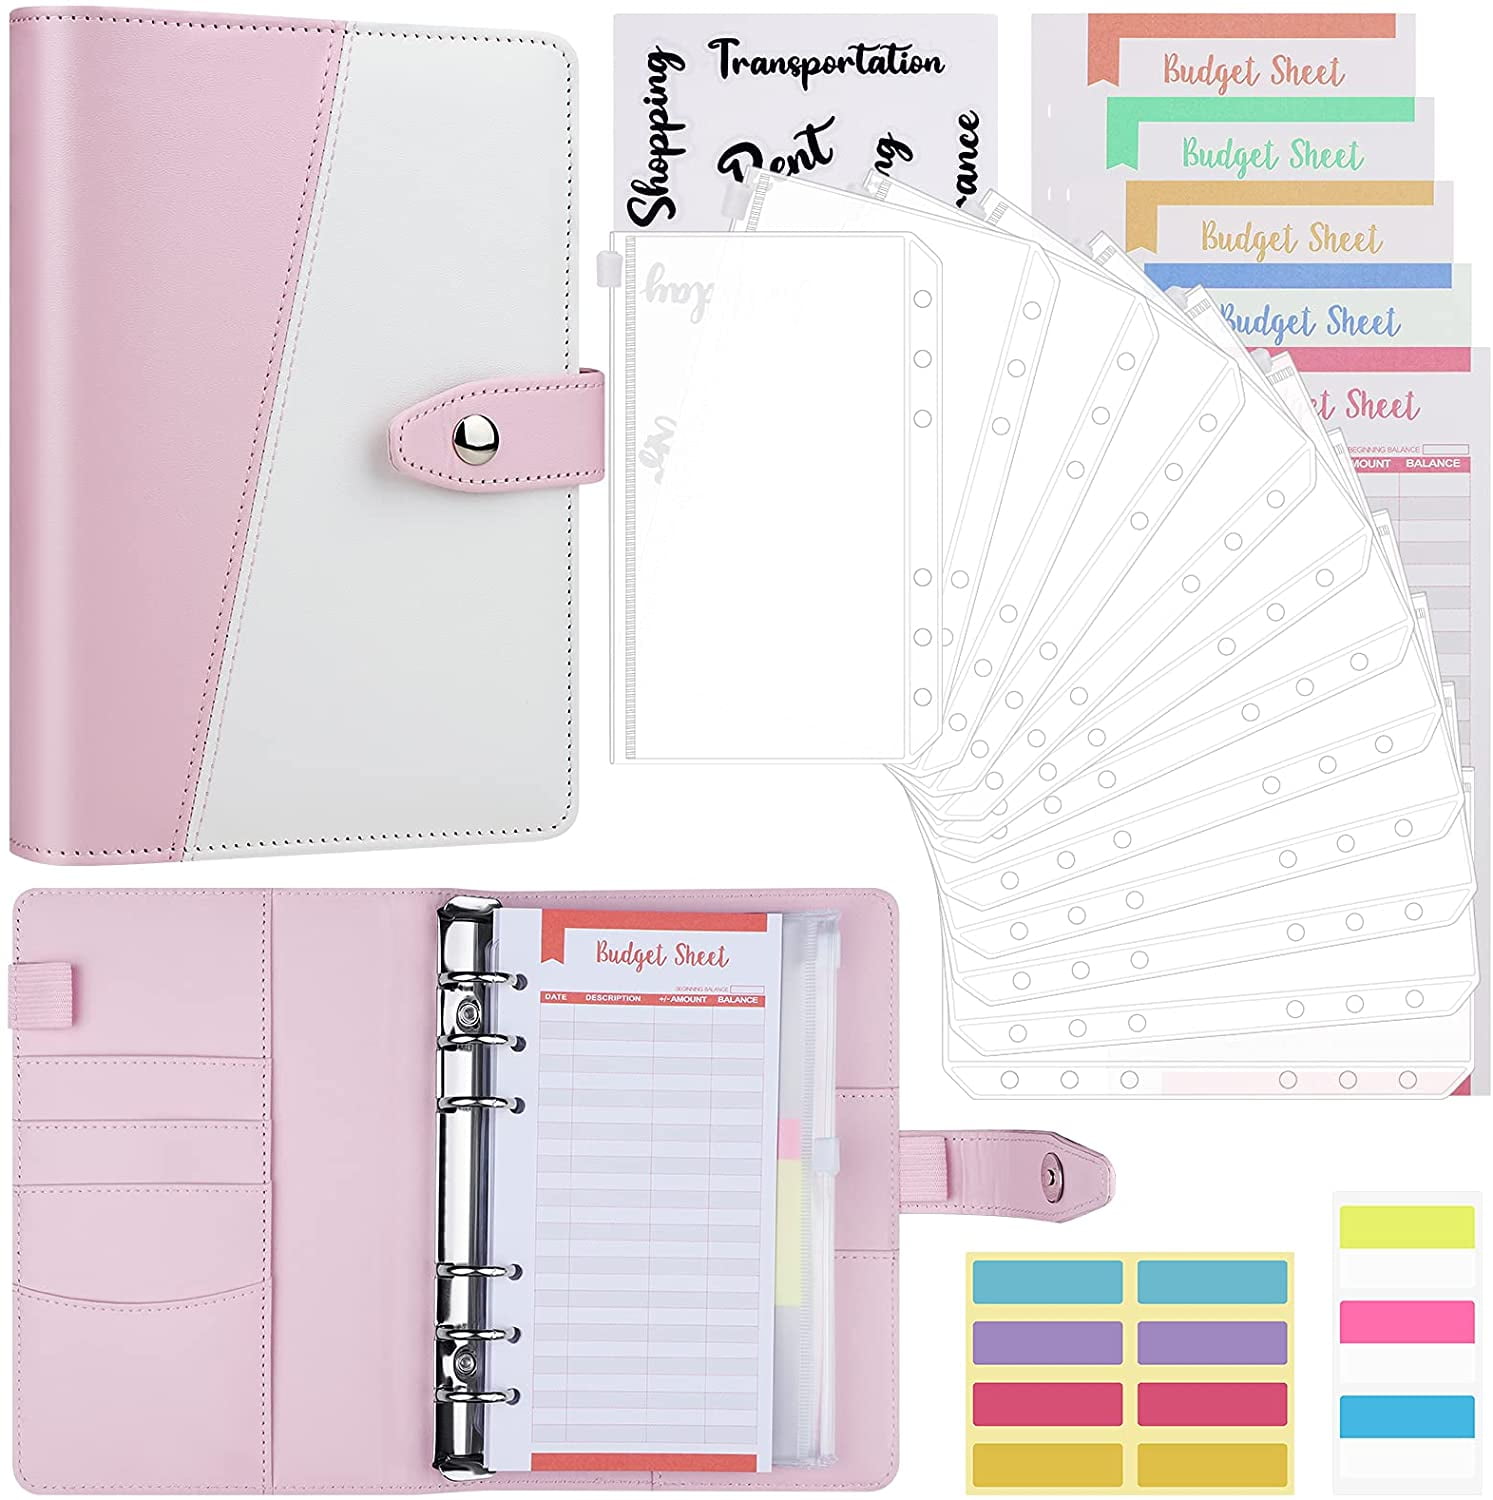 Money Organizer for Cash for Saving A6 Binder with 12pcs Expense Tracker Budget Sheets Zuozee Budget Binder with 10pcs Pre-printed Cash Envelopes for Budgeting Pink